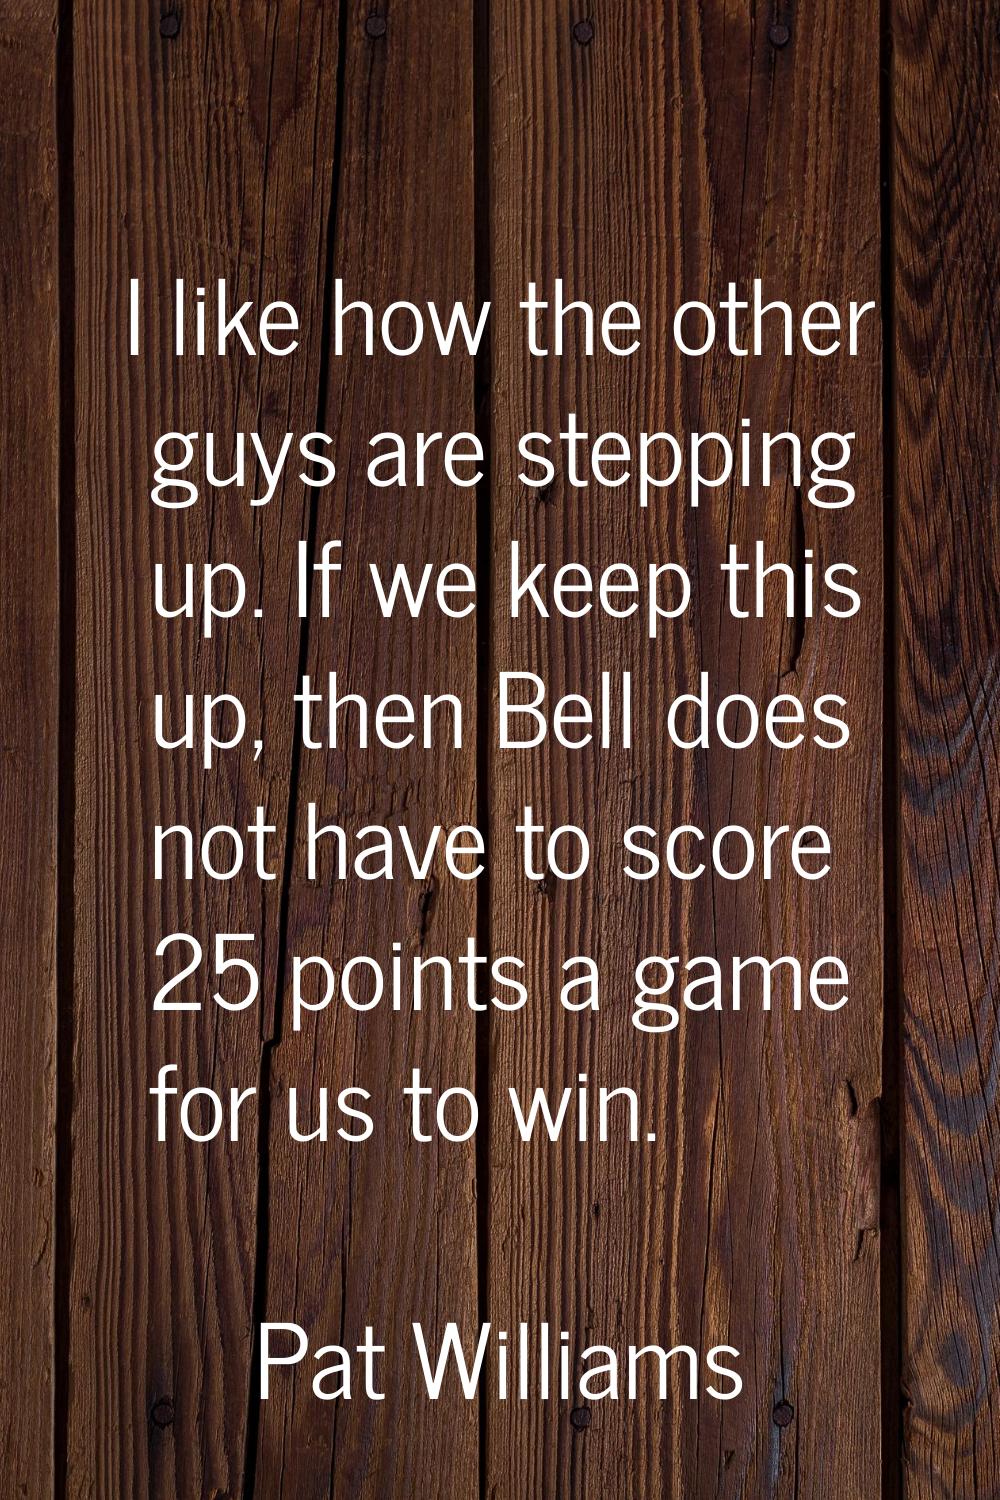 I like how the other guys are stepping up. If we keep this up, then Bell does not have to score 25 